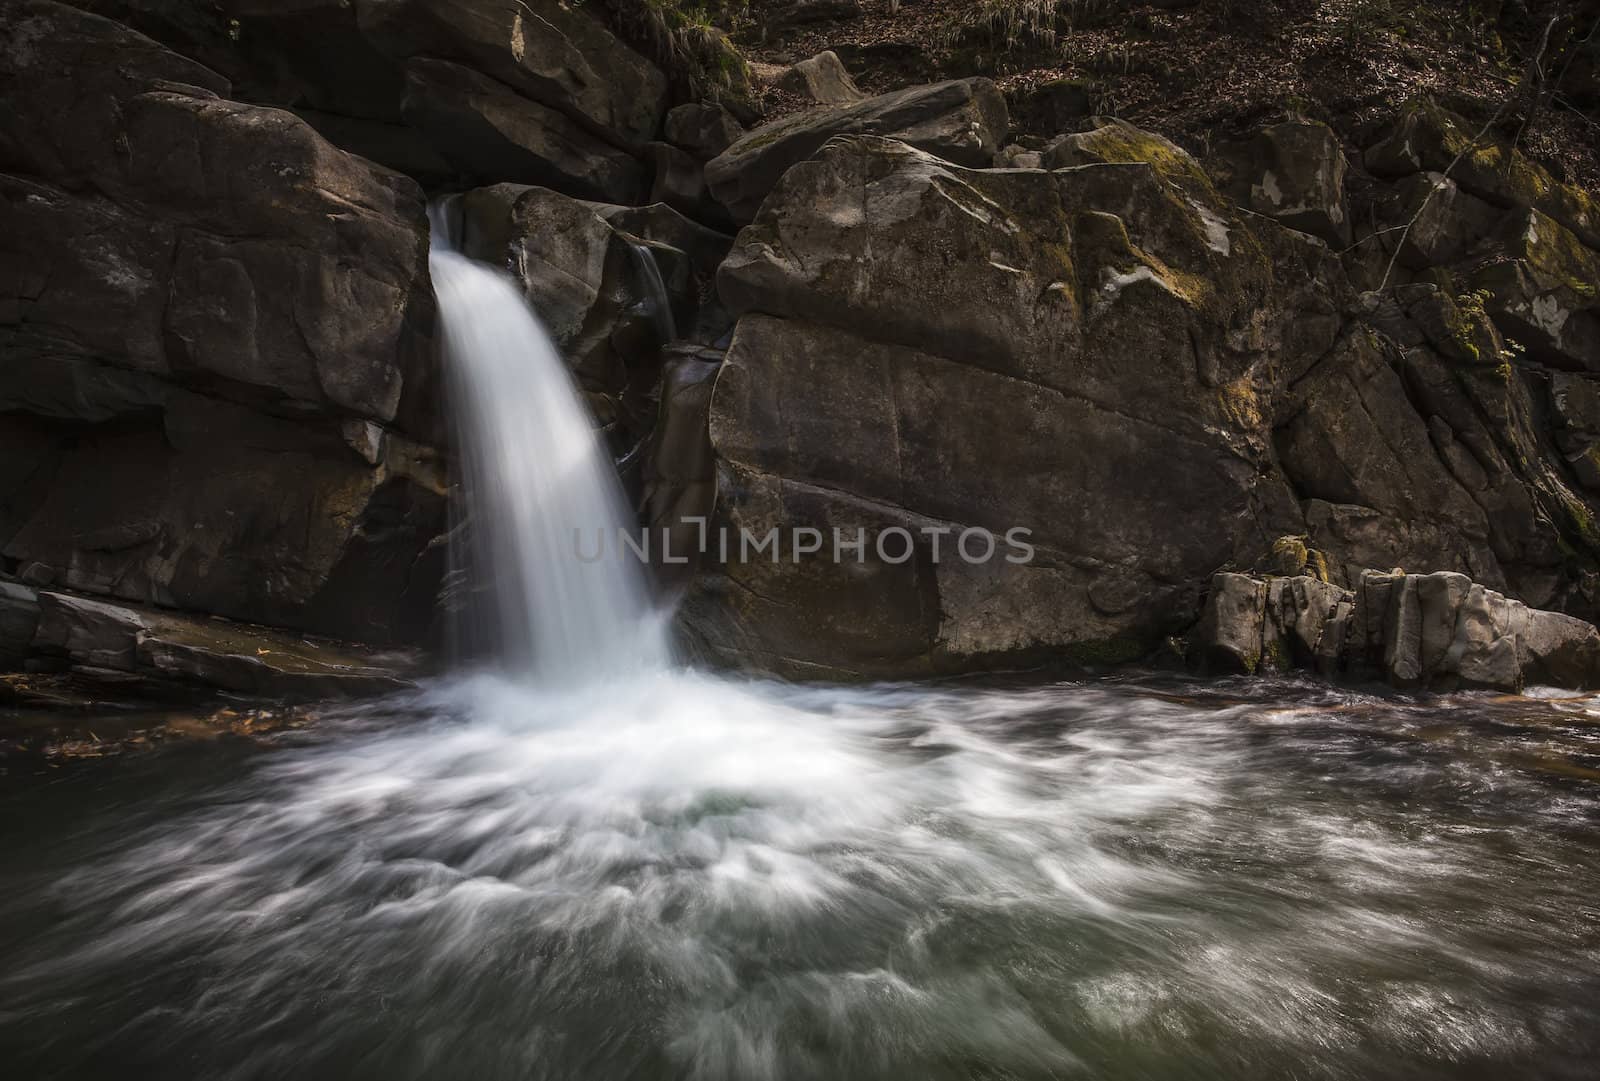 Motion blur waterfall nature landscape with rocks and flowing water